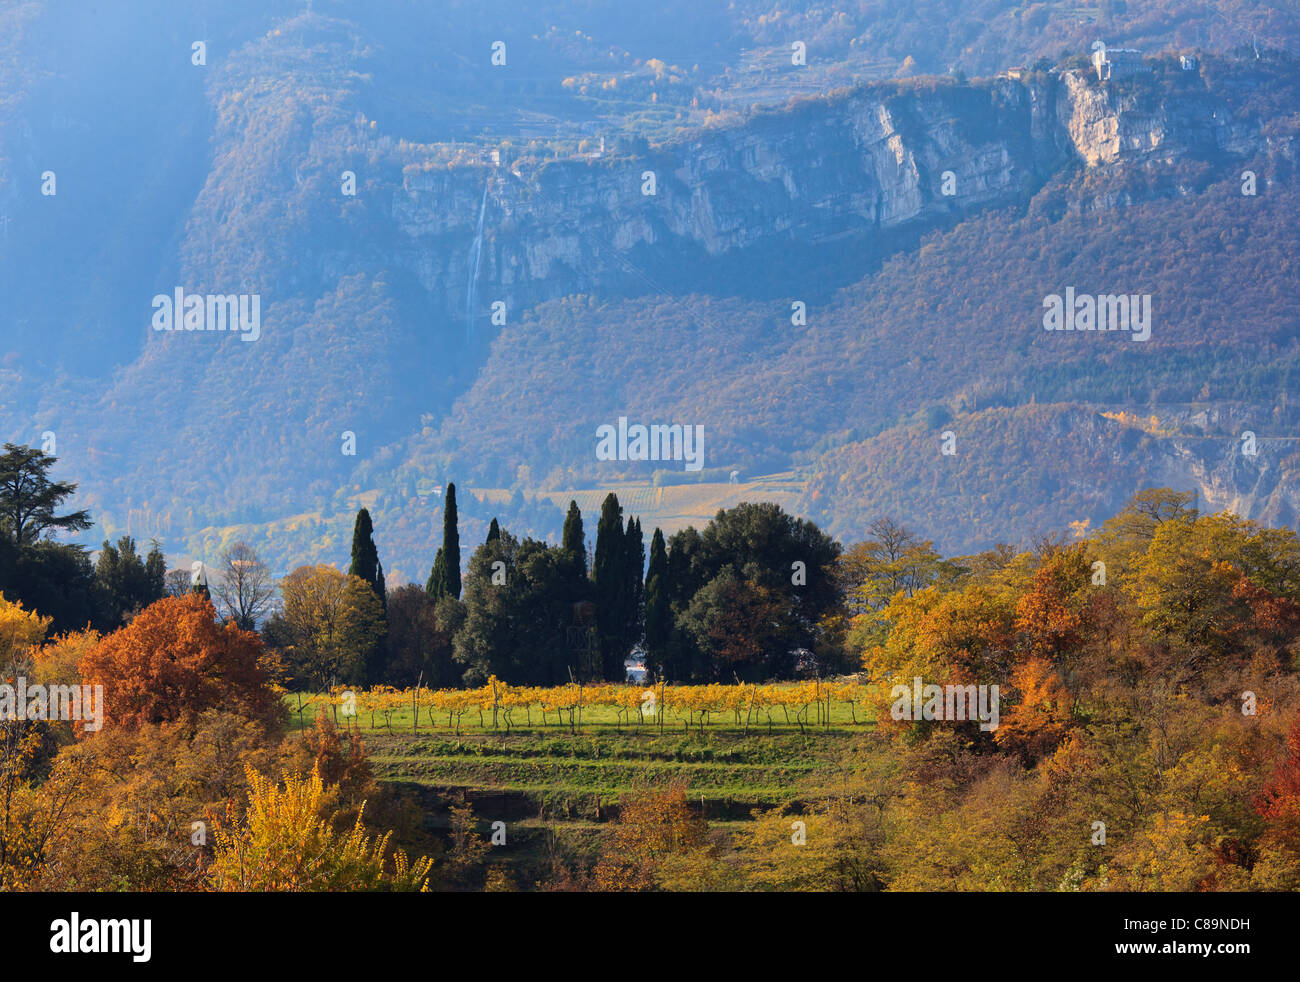 Scenic view on a small vineyard against mountain background Stock Photo